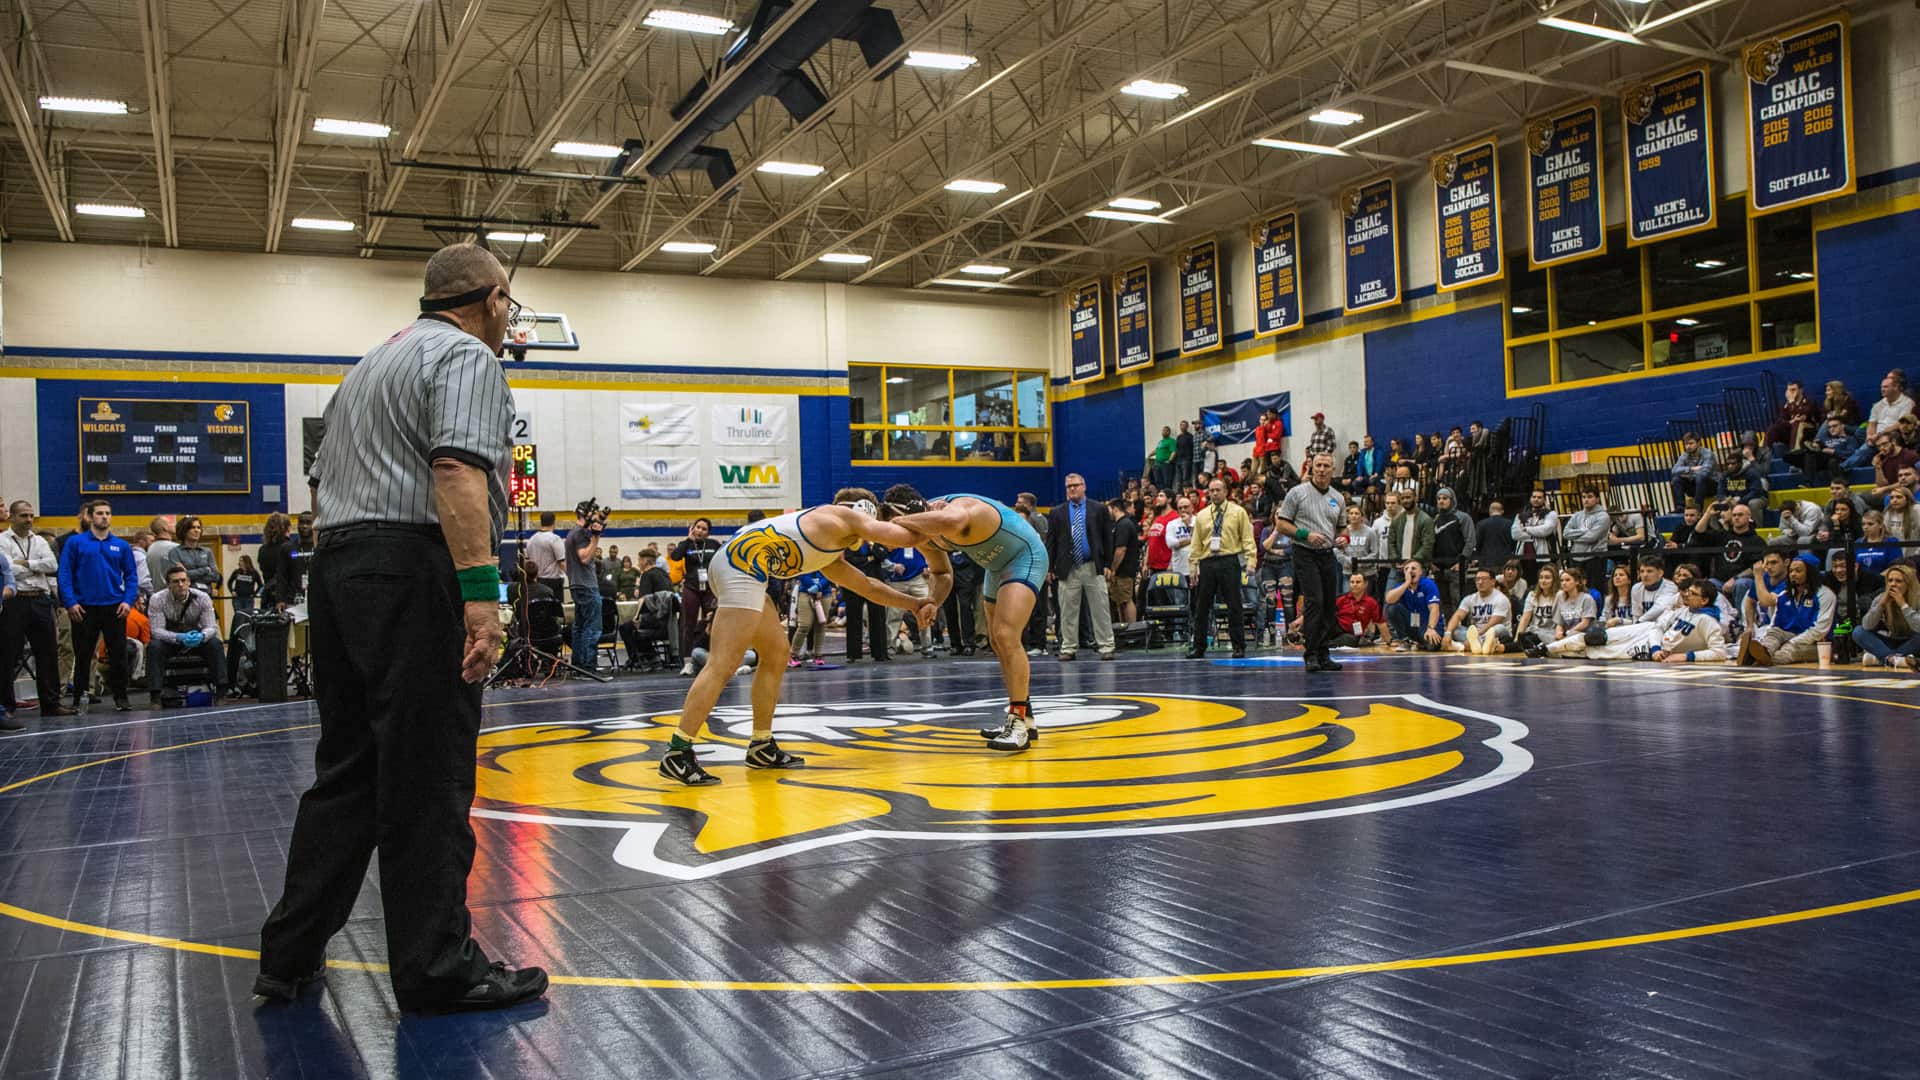 A packed house for this past weekend’s NCAA D3 Regionals, held at JWU’s Providence Campus.